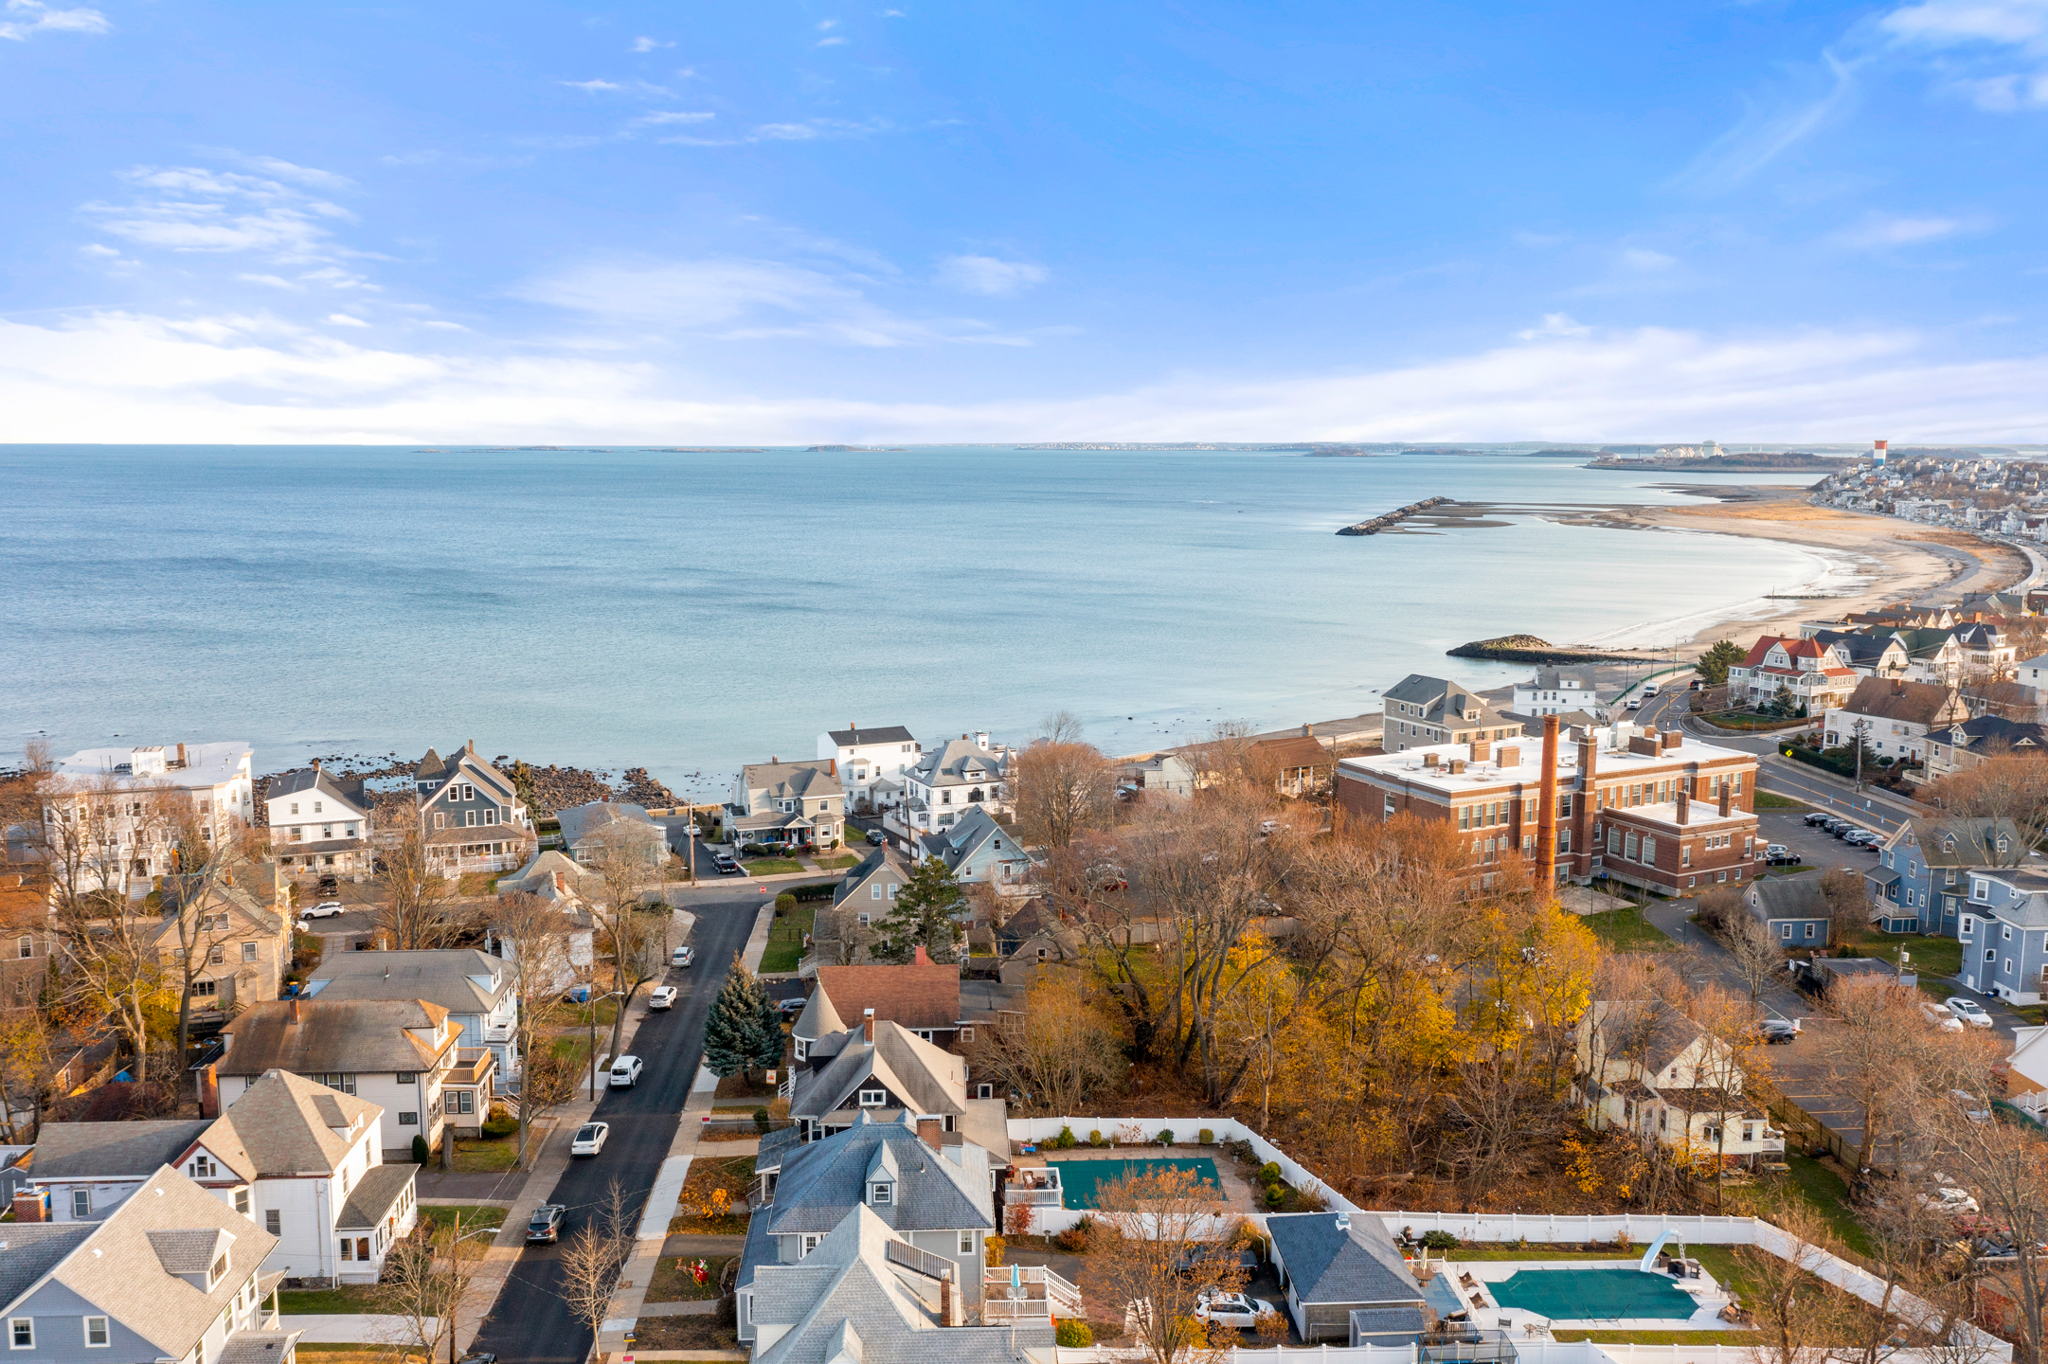 An aerial view of the Victorian home at 24 Temple Ave. in Winthrop and the other neighborhood homes, which have views of Boston Harbor.